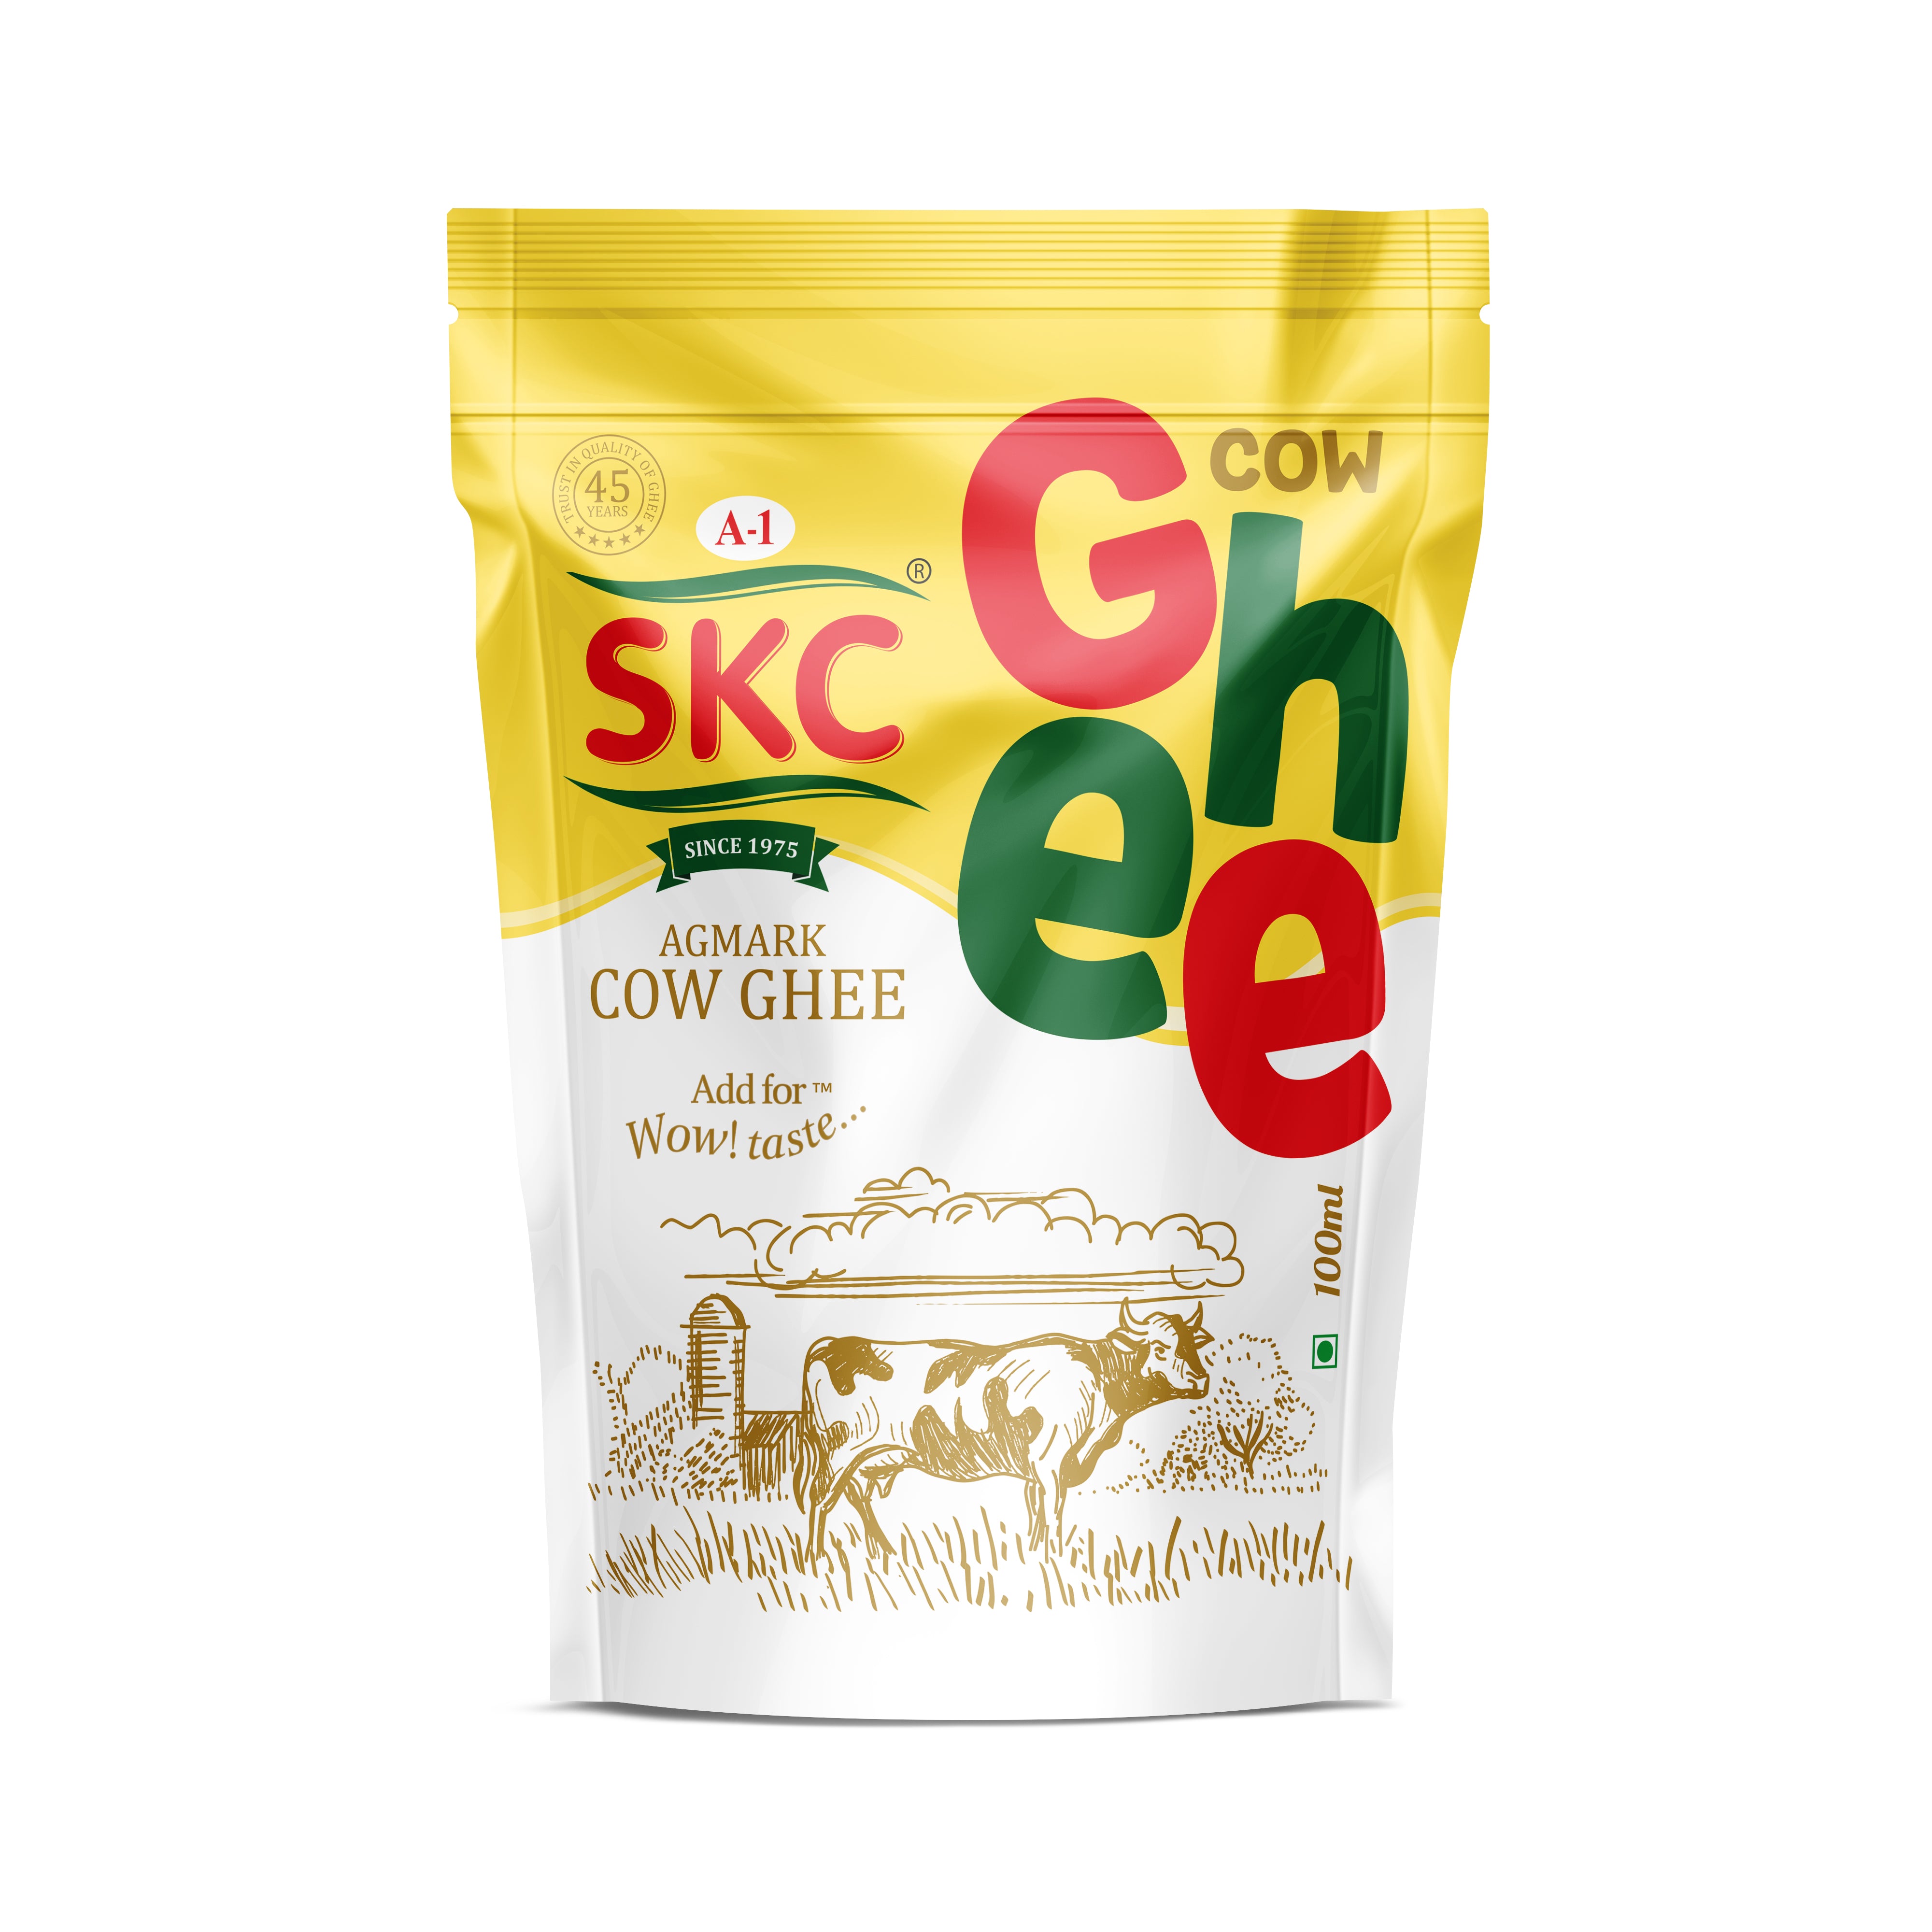 A1 SKC Pure Cow Ghee 100 ml Pouch - Pack of 5